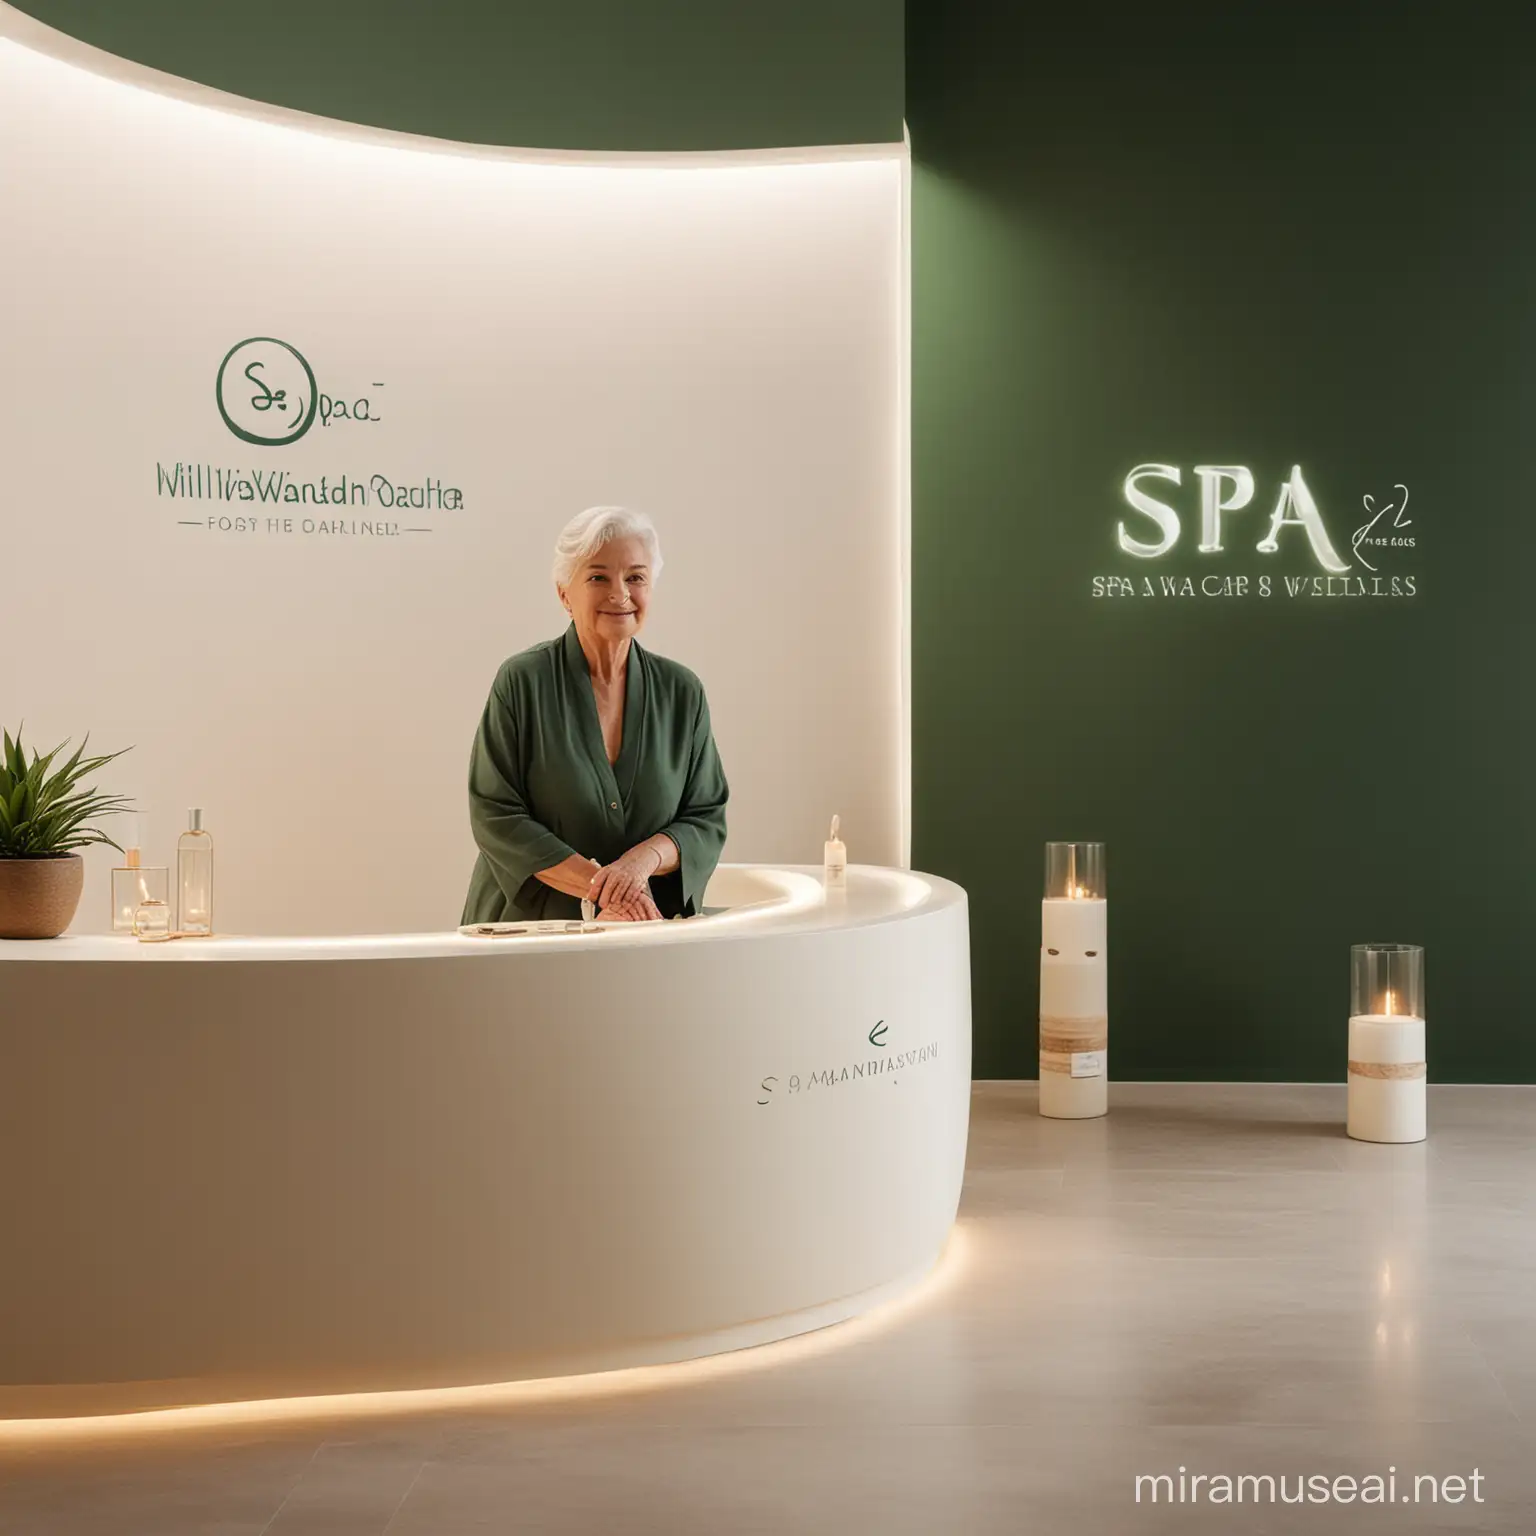 Spa and wellness branding for old people. One message table with mood lighting. Cream and dark green logo with spa interiors in the background. Luxury minimal and white interiors. Curved walls of interiors. Old woman in the background.